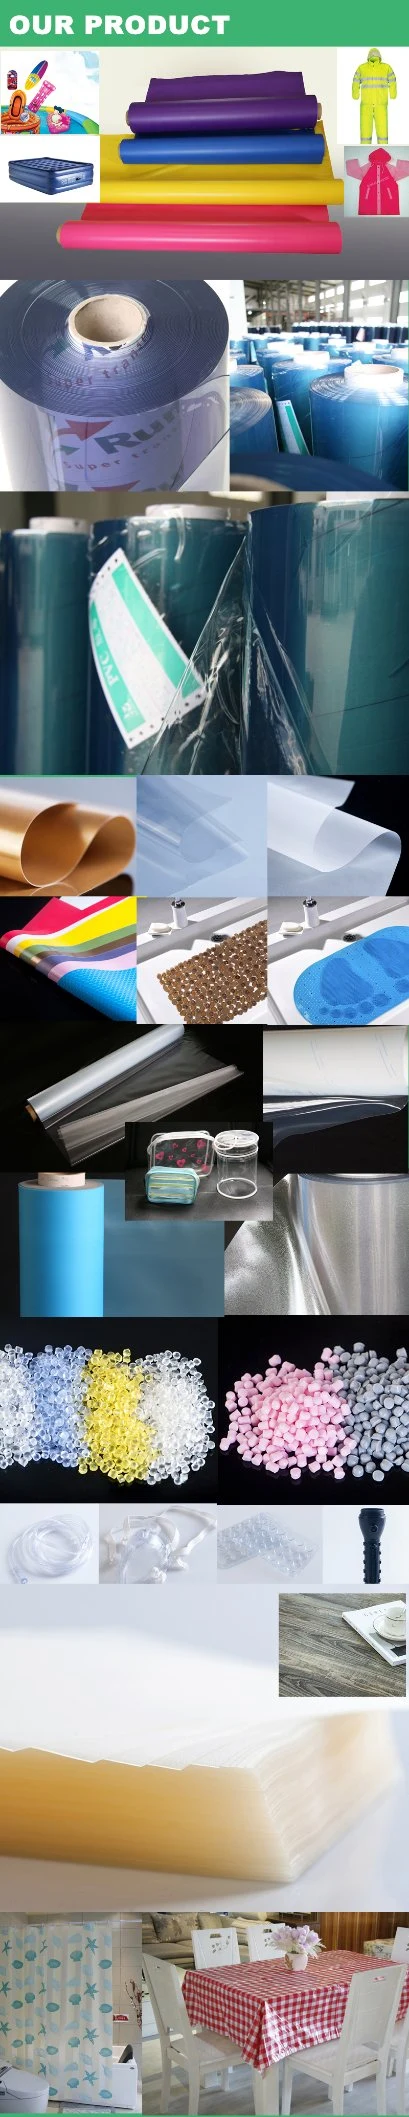 High Quality Super Clear Soft PVC Film Produced by Real Factory